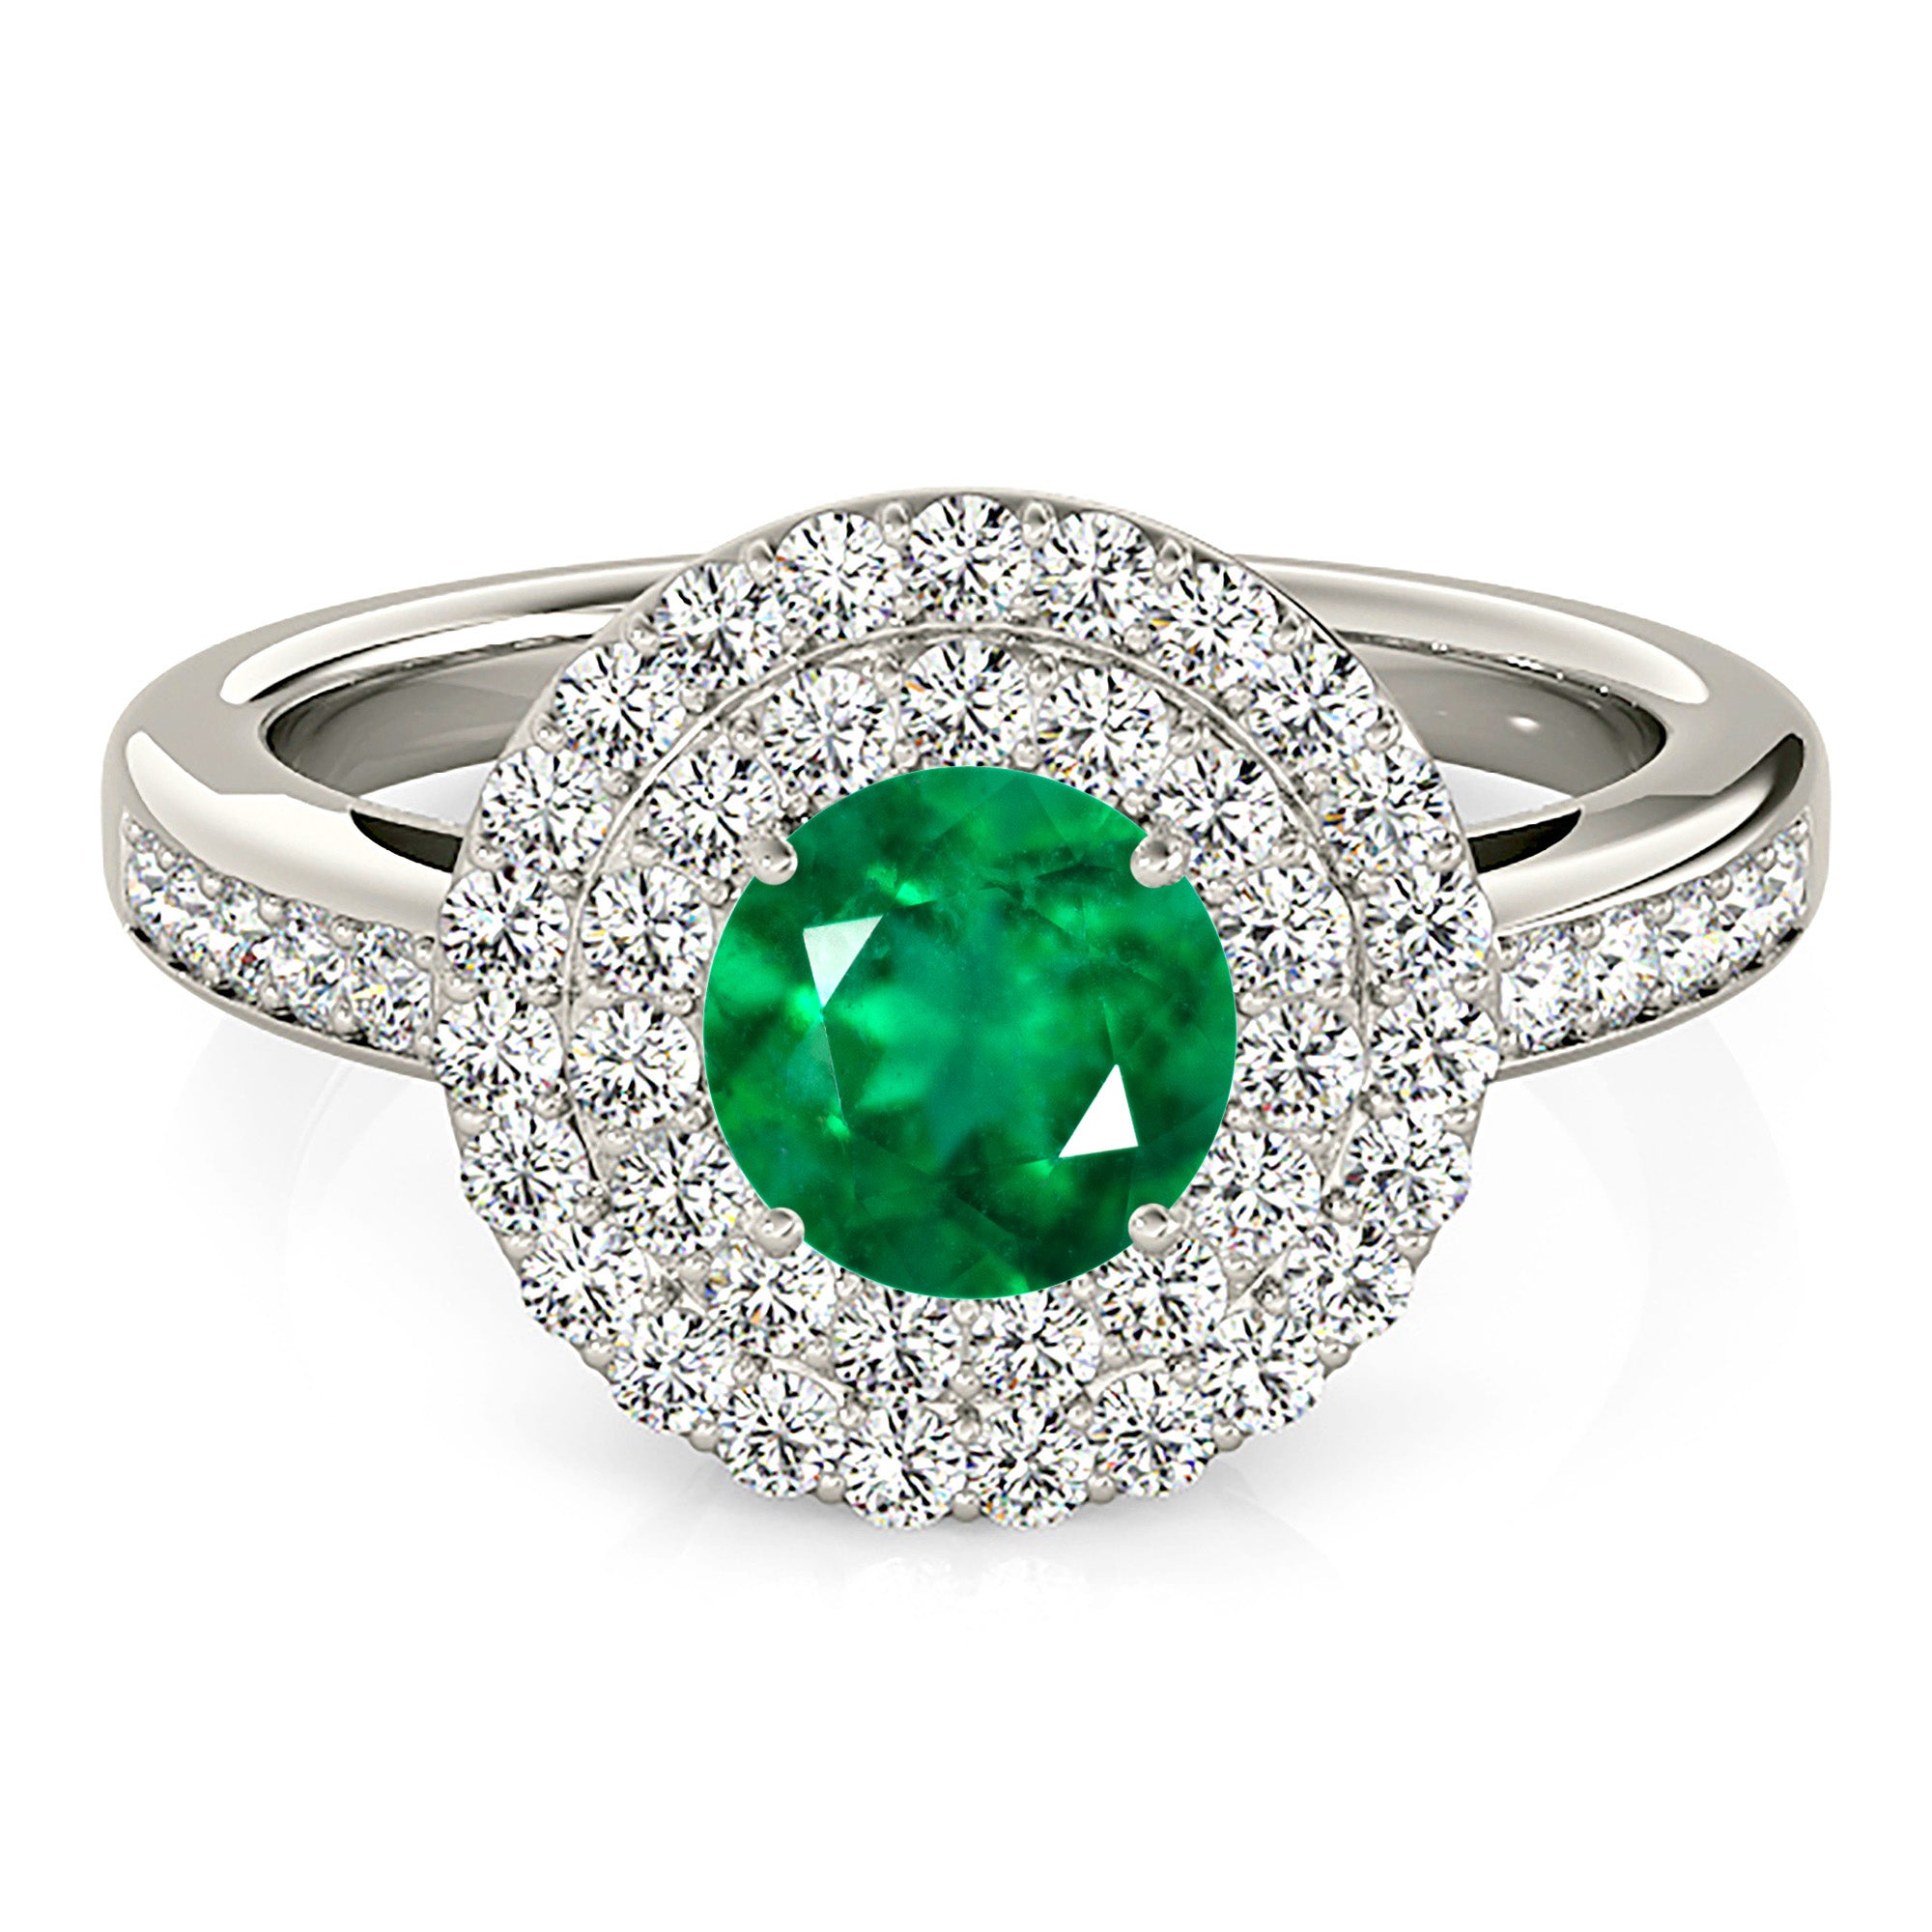 1.14 ct. Genuine Emerald Ring With 0.70 ctw. Diamond Double Halo And Delicate Diamond Band-in 14K/18K White, Yellow, Rose Gold and Platinum - Christmas Jewelry Gift -VIRABYANI